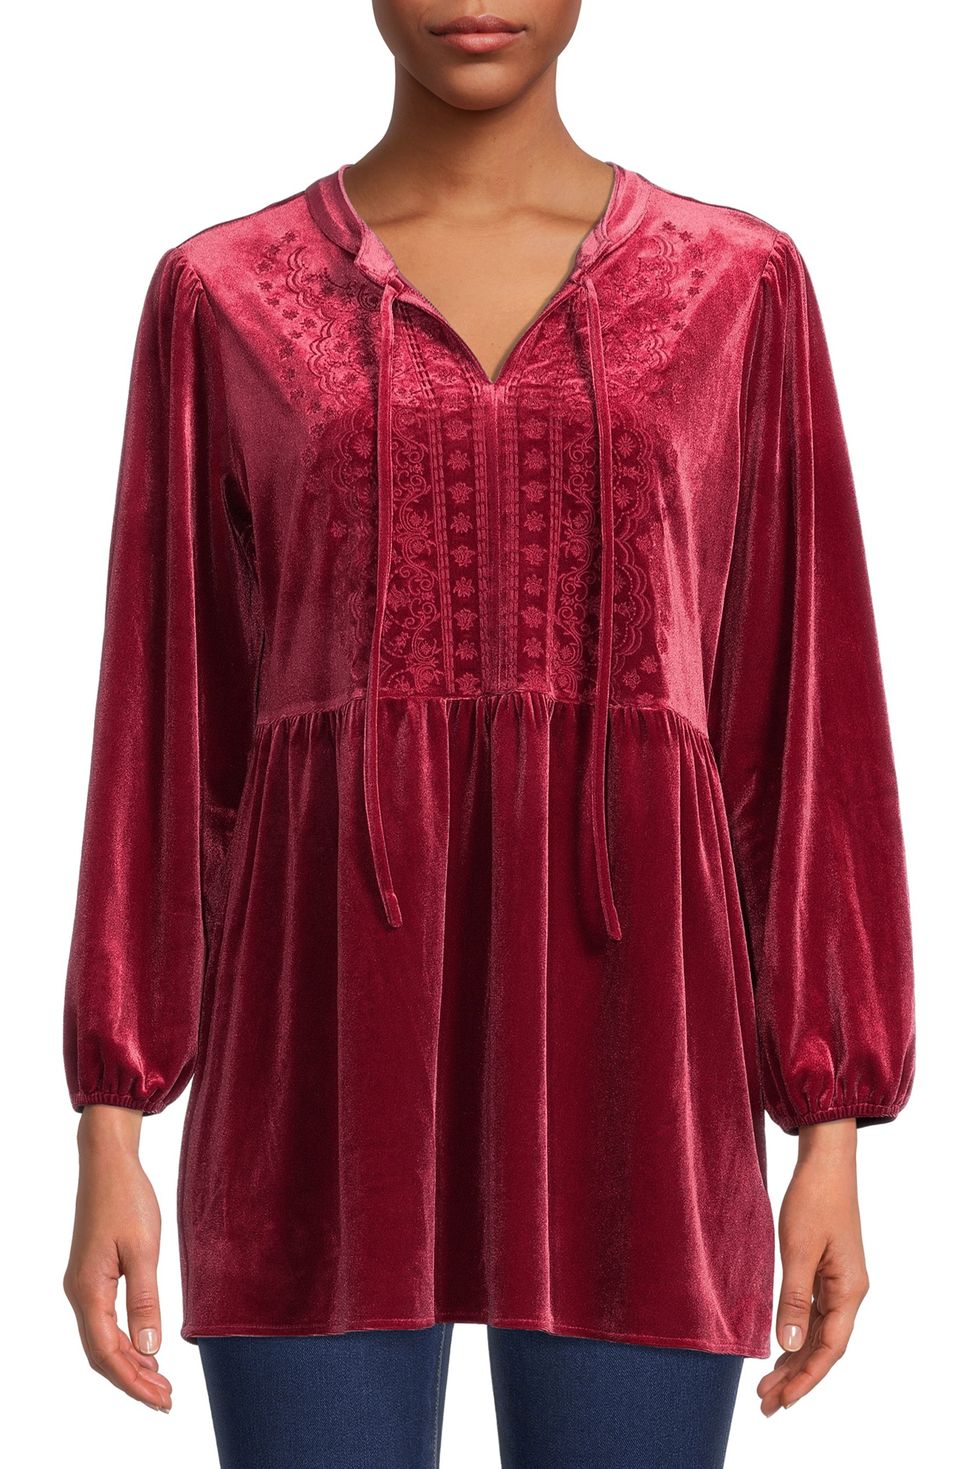 The Pioneer Woman Embroidered Velvet Empire Waist Top